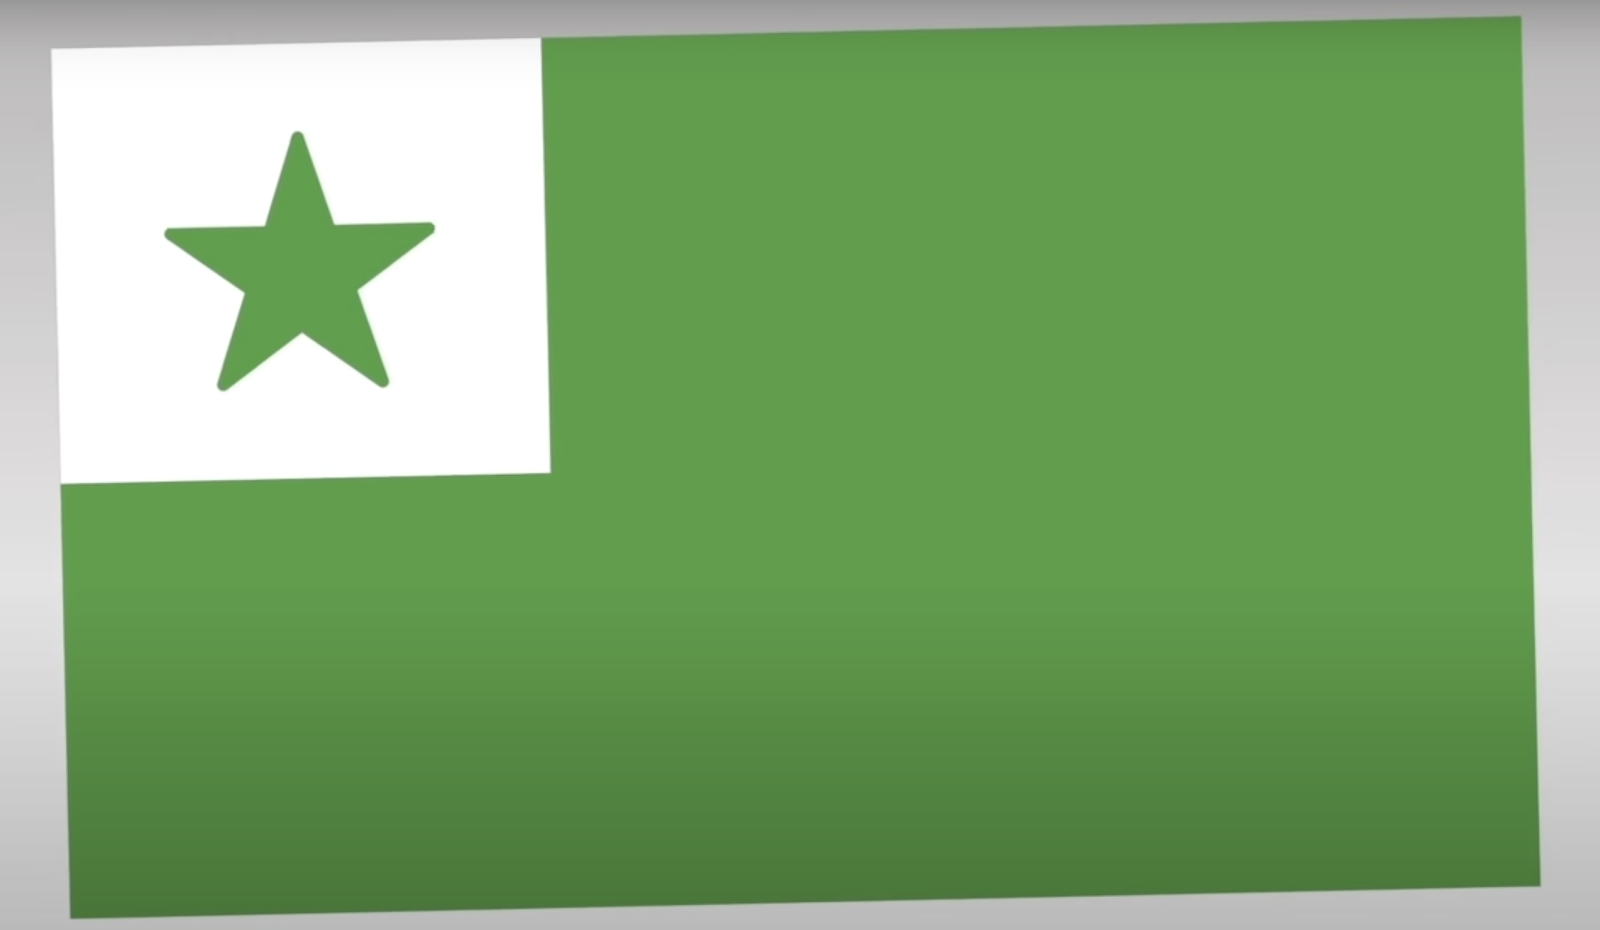 A green flag with a star

Description automatically generated